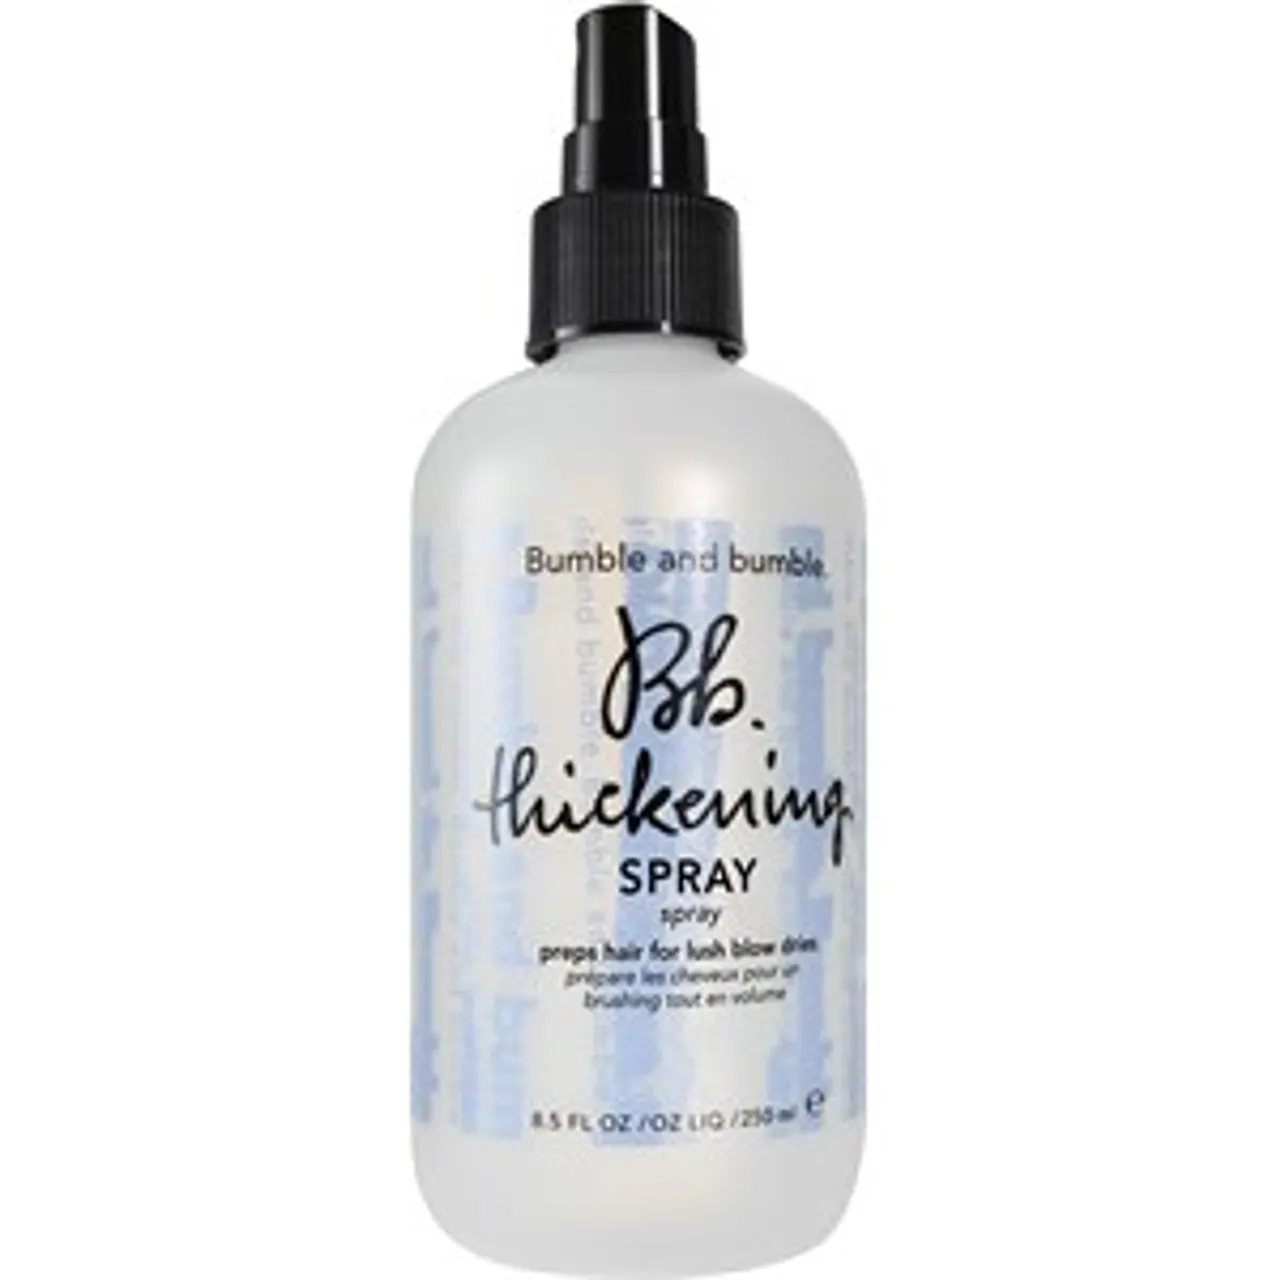 Bumble and bumble Thickening Spray Pre-Styler Female 250 ml